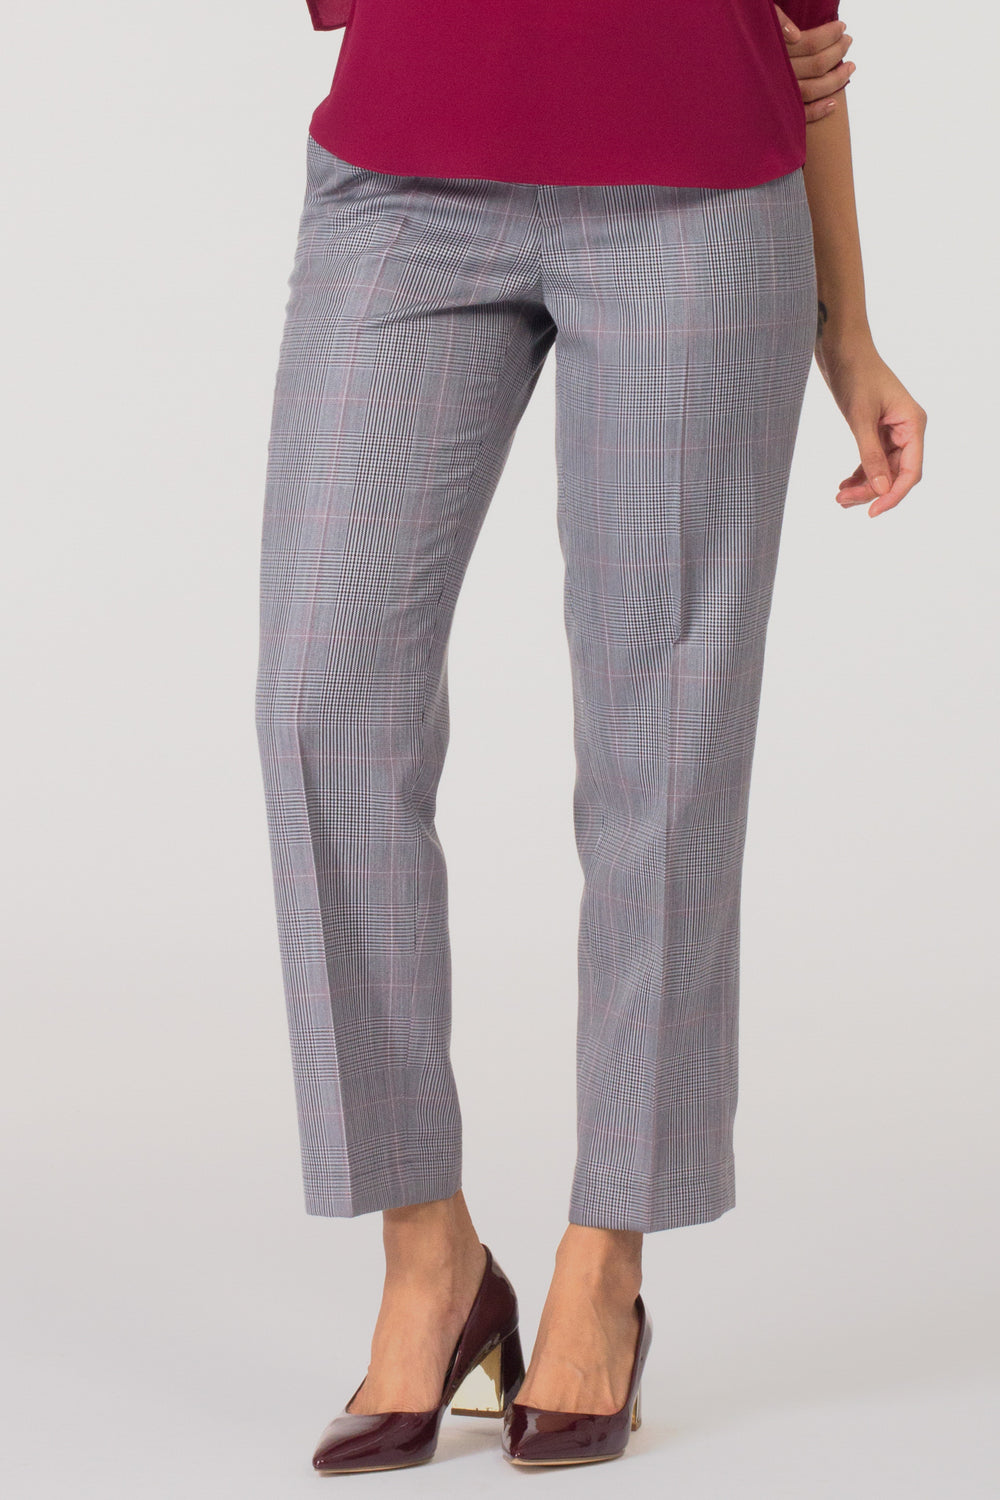 Buy BLUSH Trousers & Pants for Women by Annabelle by Pantaloons Online |  Ajio.com